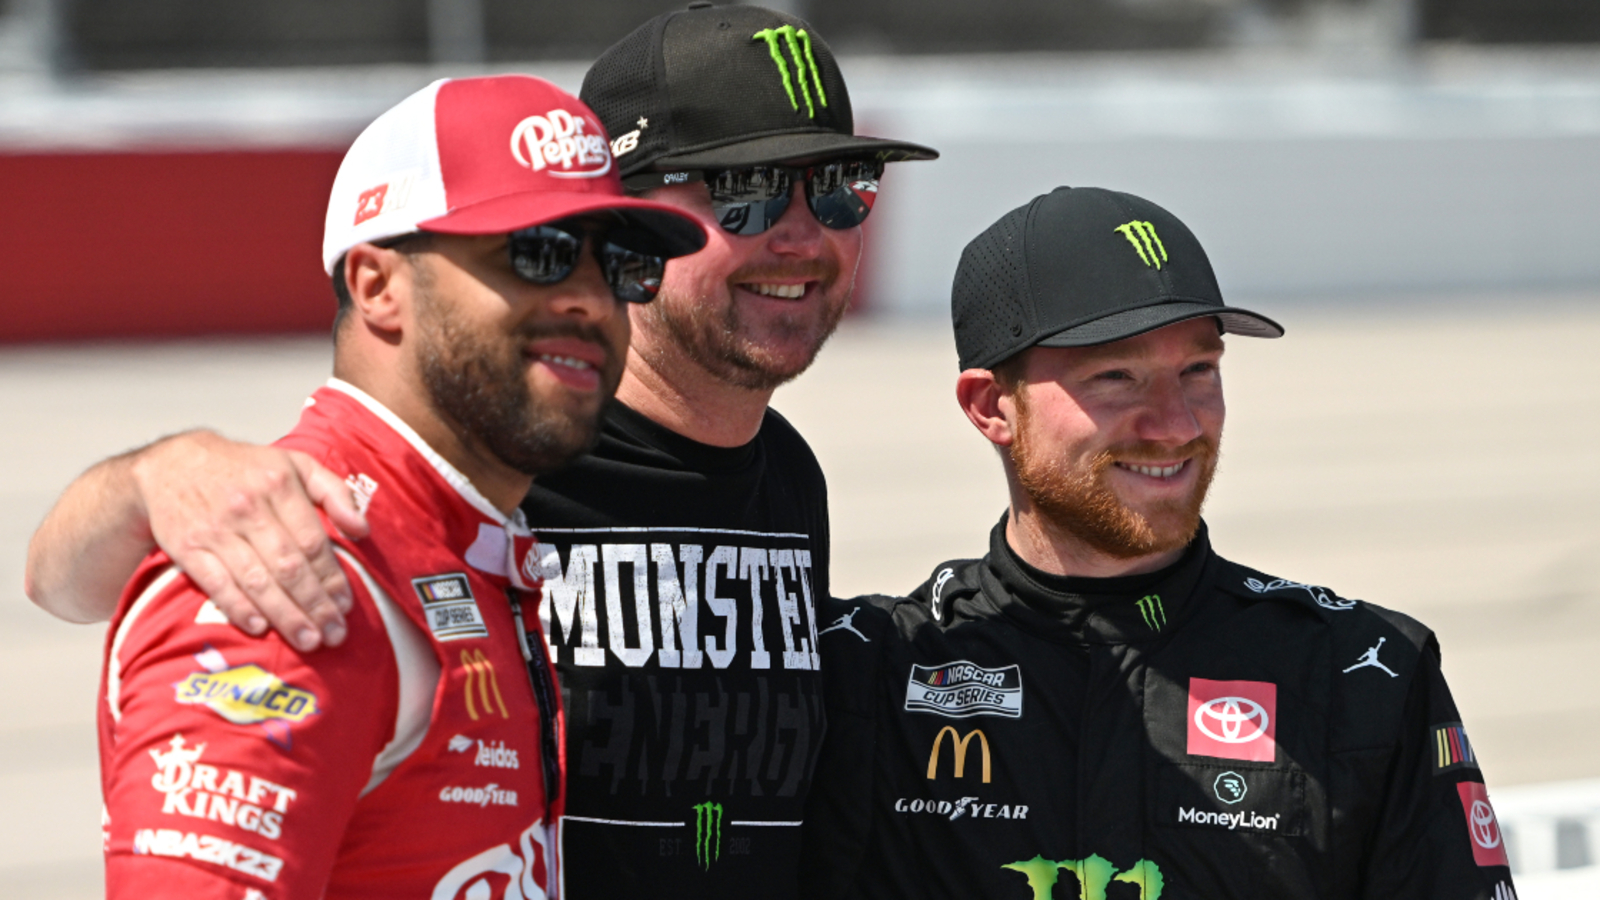 Kurt Busch reflects on Bubba Wallace making the Round of 12: ‘This is huge’